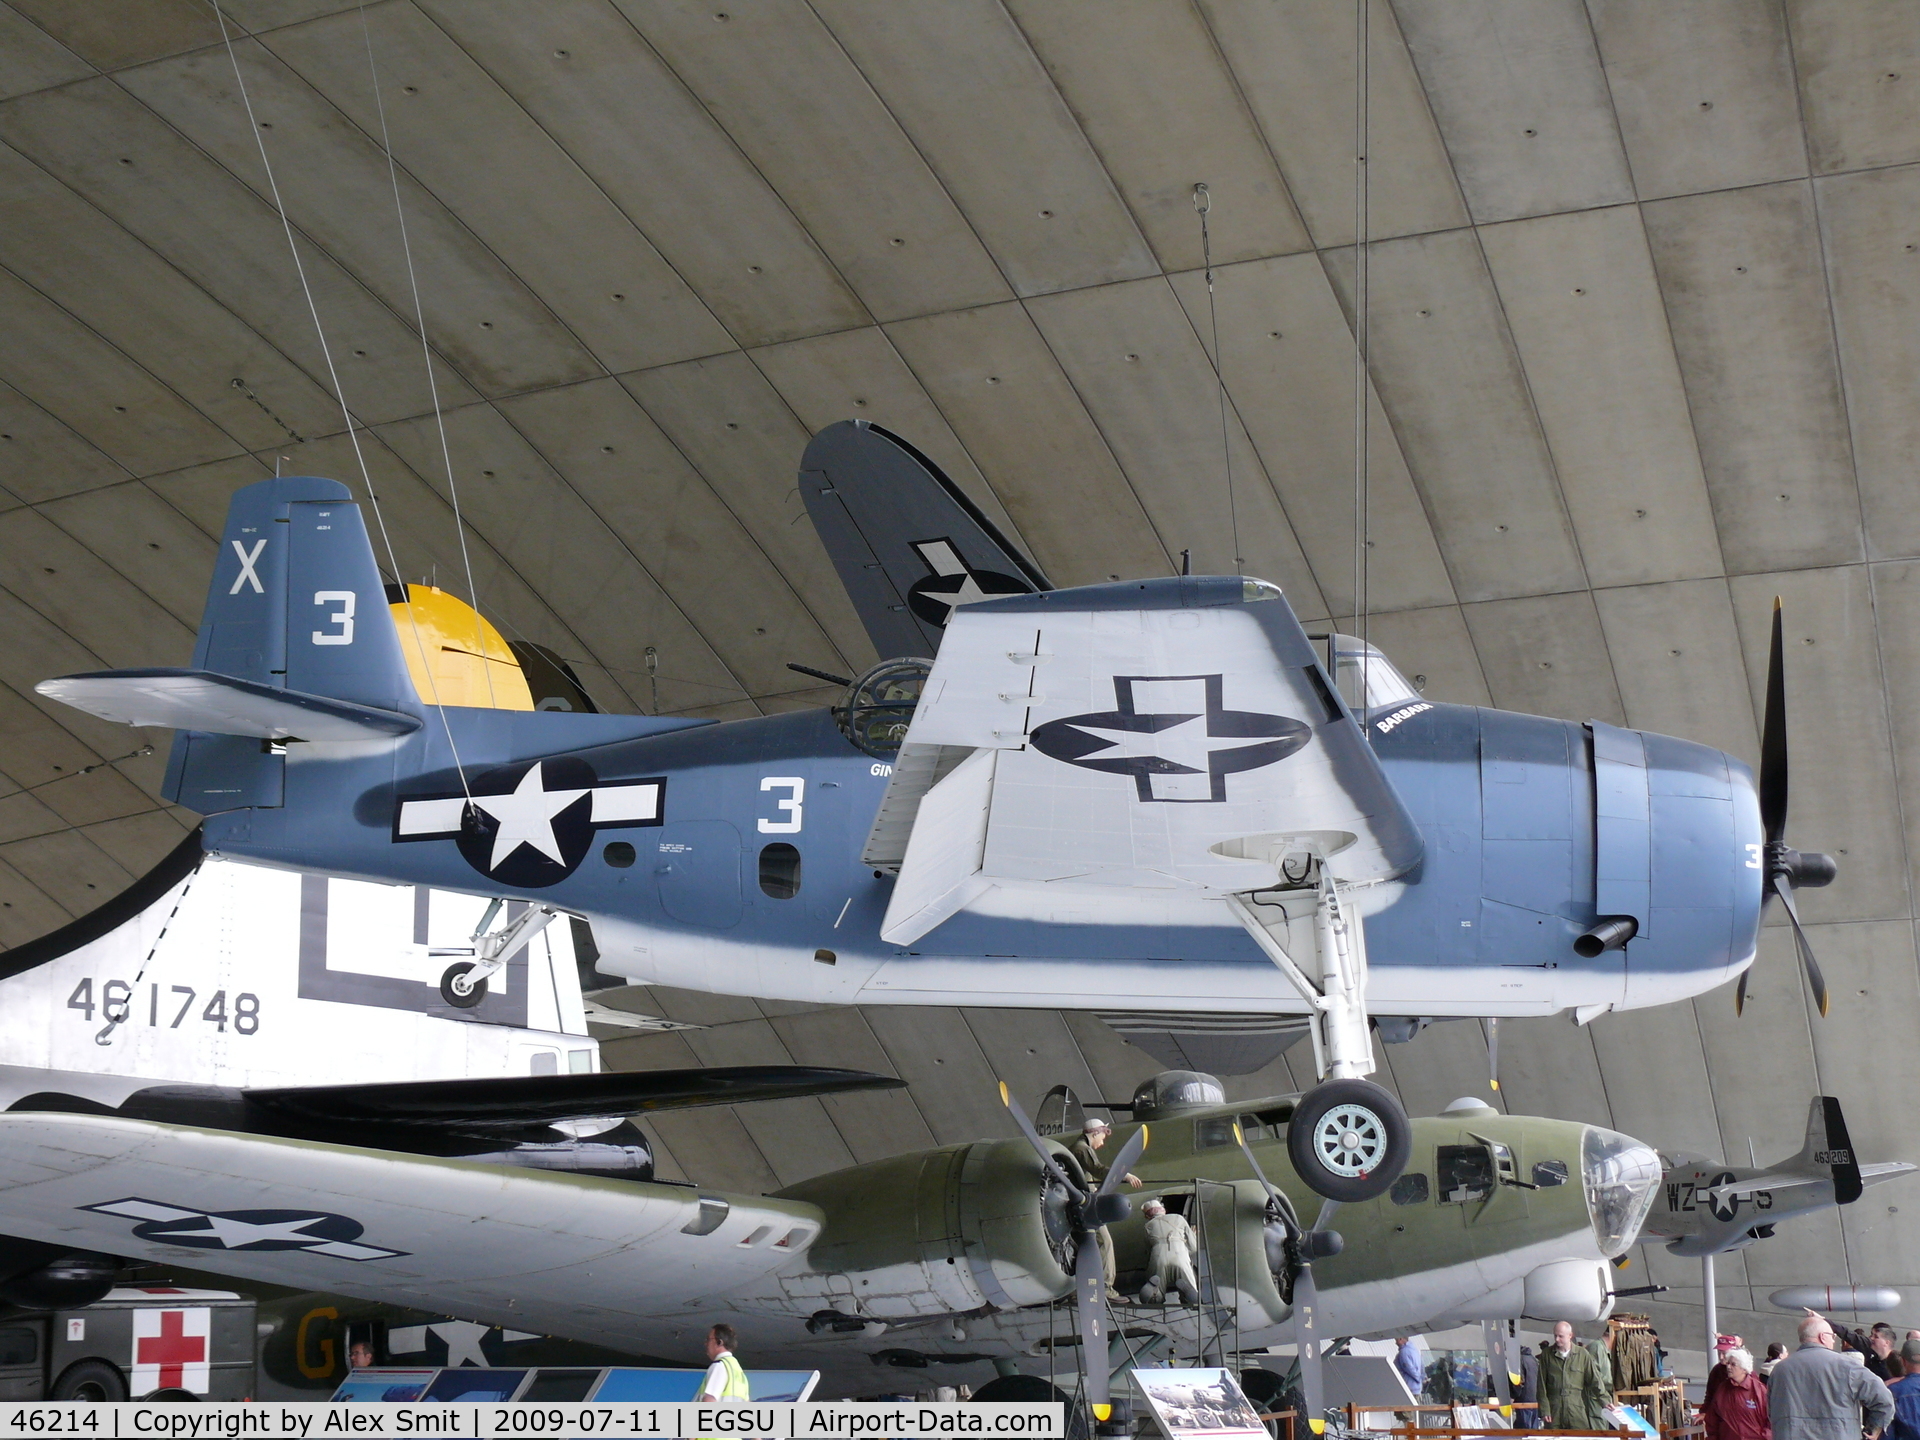 46214, Grumman TBM-3E Avenger C/N 2066, Grumman TBM-3E Avenger 46214/X-3 US Navy in the American Air Museum